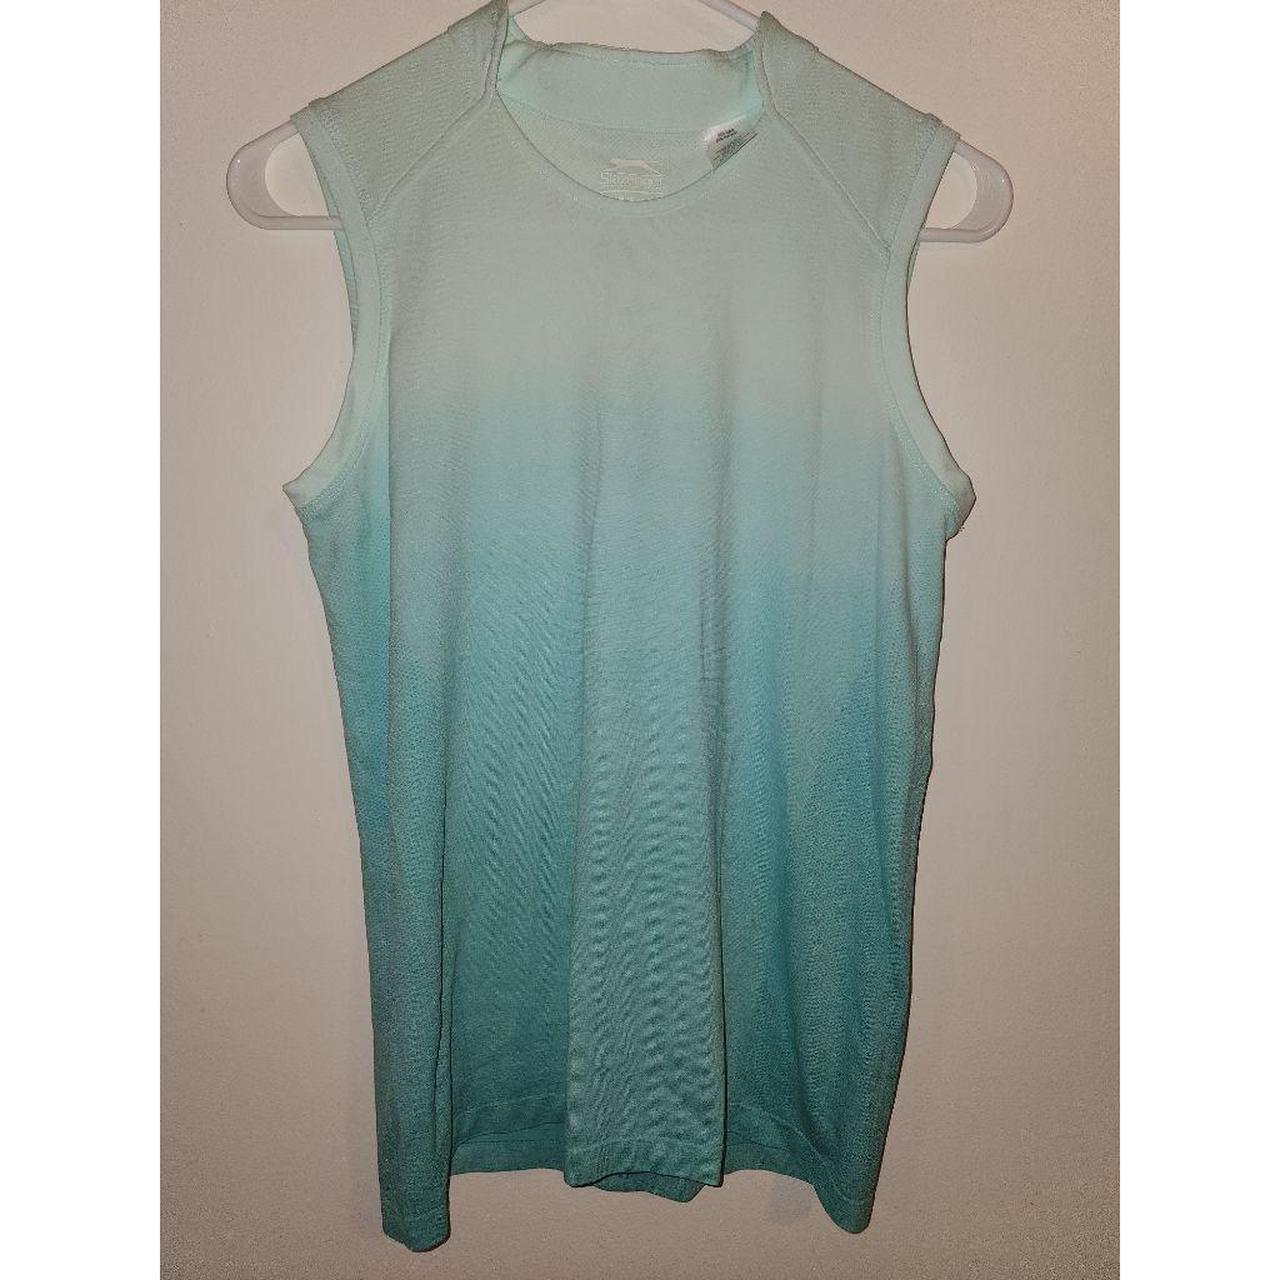 Product Image 1 - Small
Collar tank
Golf Tank
Ombre teal

65% Nylon
35%